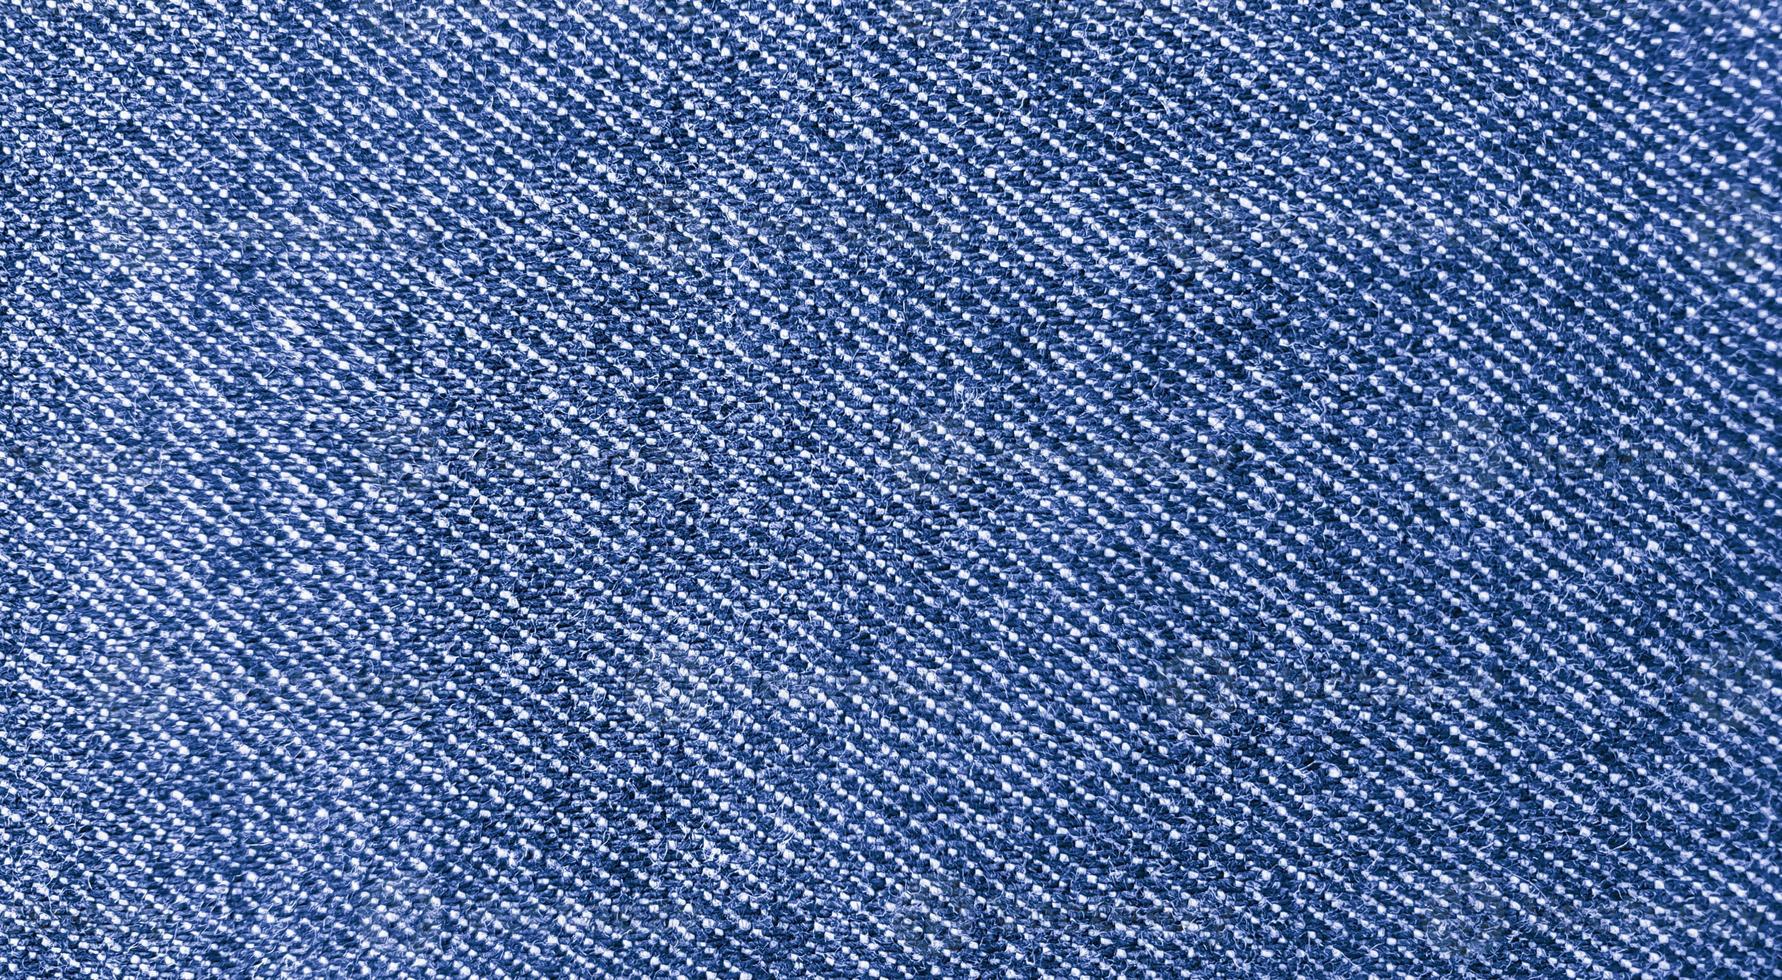 Natural cotton or linen textile. Grunge fabric texture for background photo